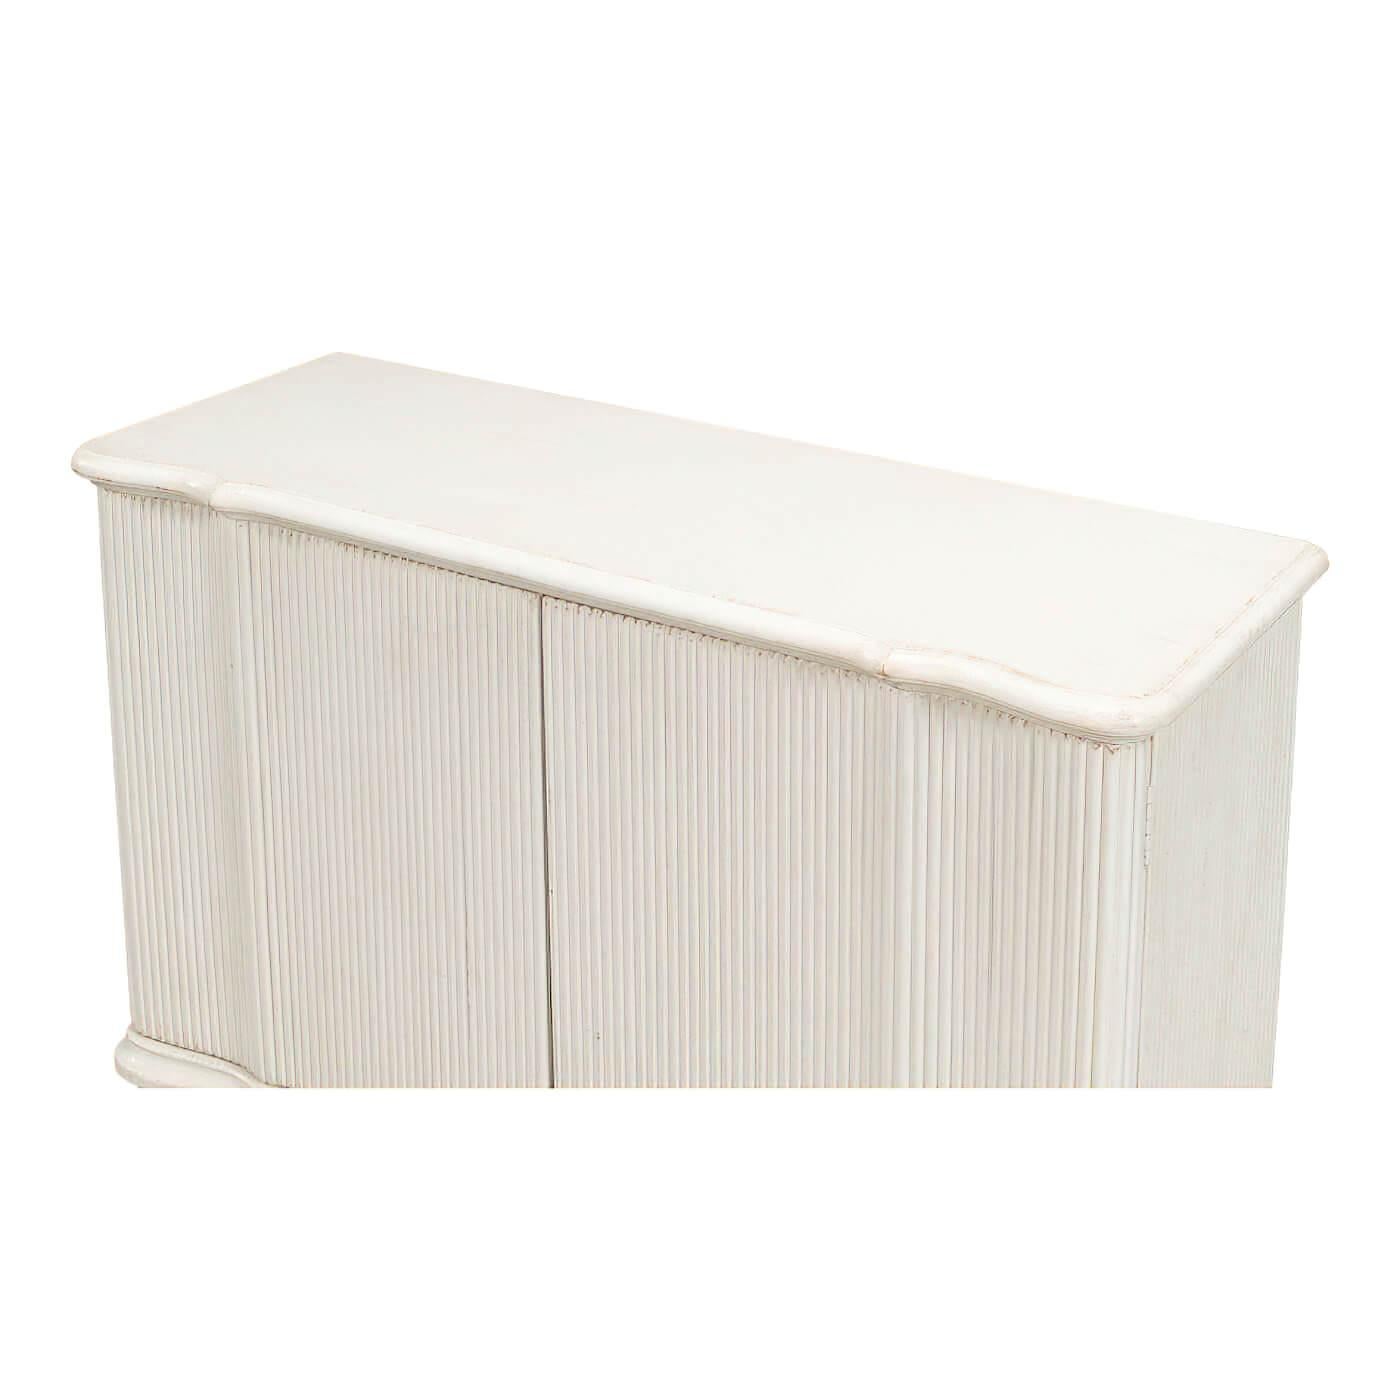 Reeded Antique White Cabinet In New Condition For Sale In Westwood, NJ